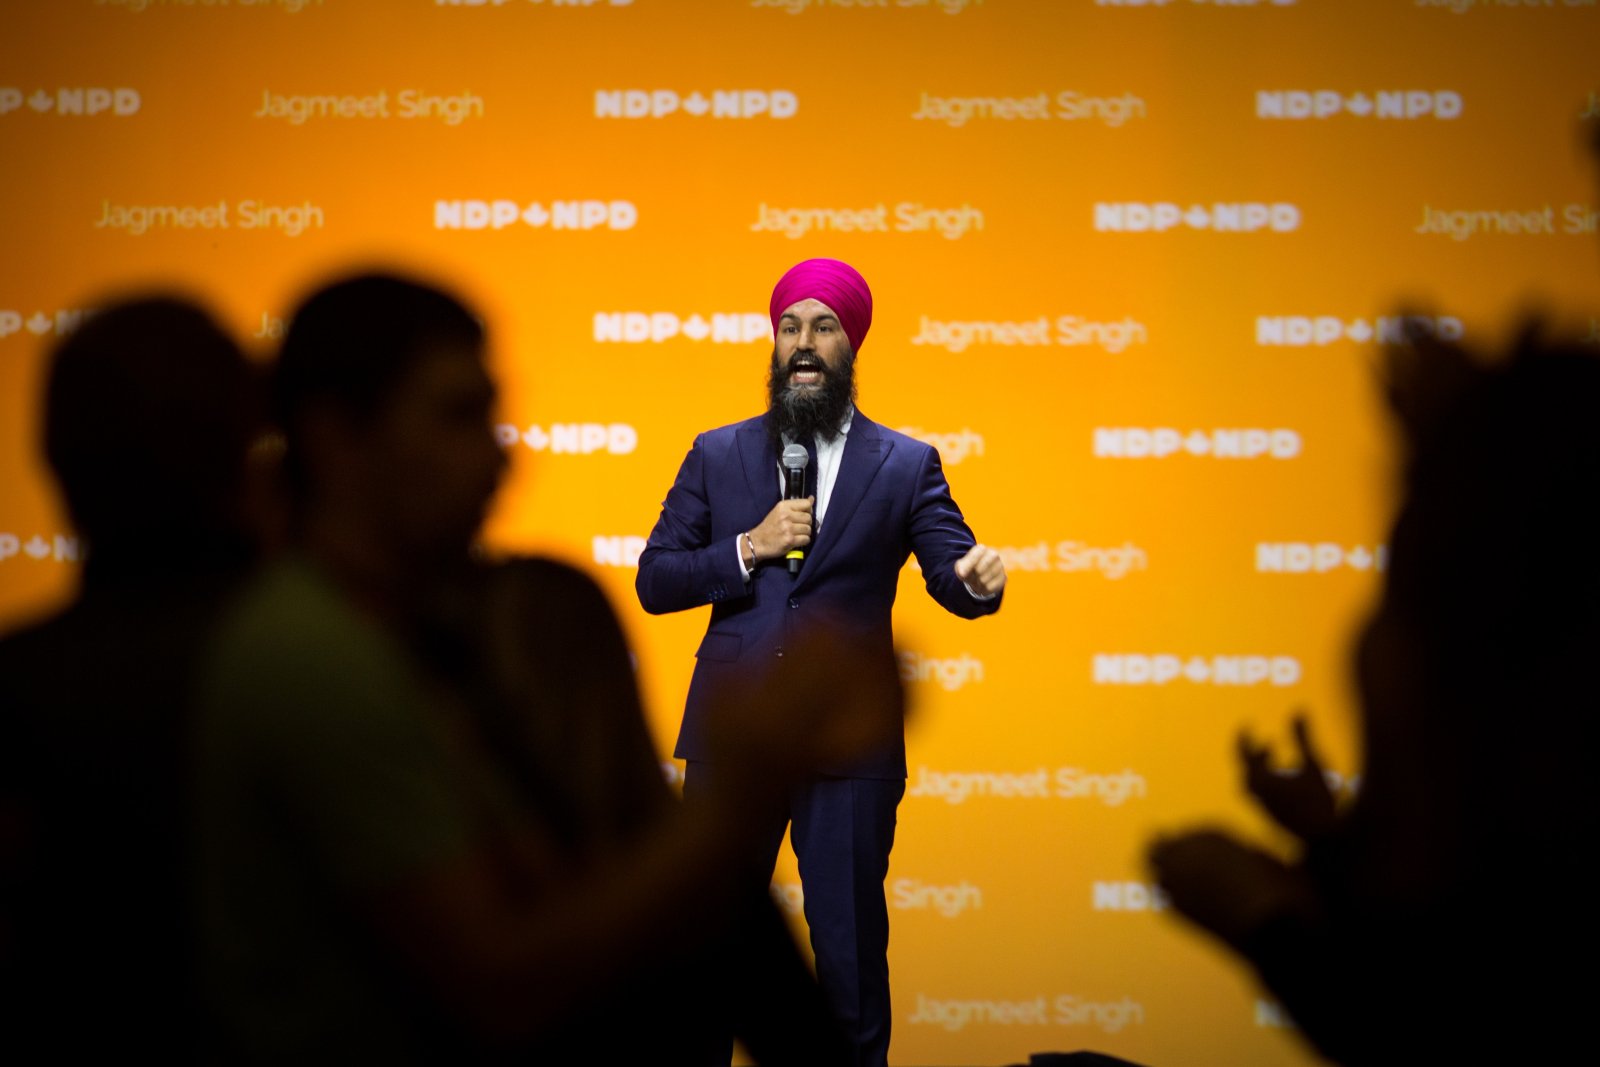 Jagmeet Singh speaks to delegates during the NDP's convention in Ottawa on Feb. 17, 2018. Photo by Alex Tétreault